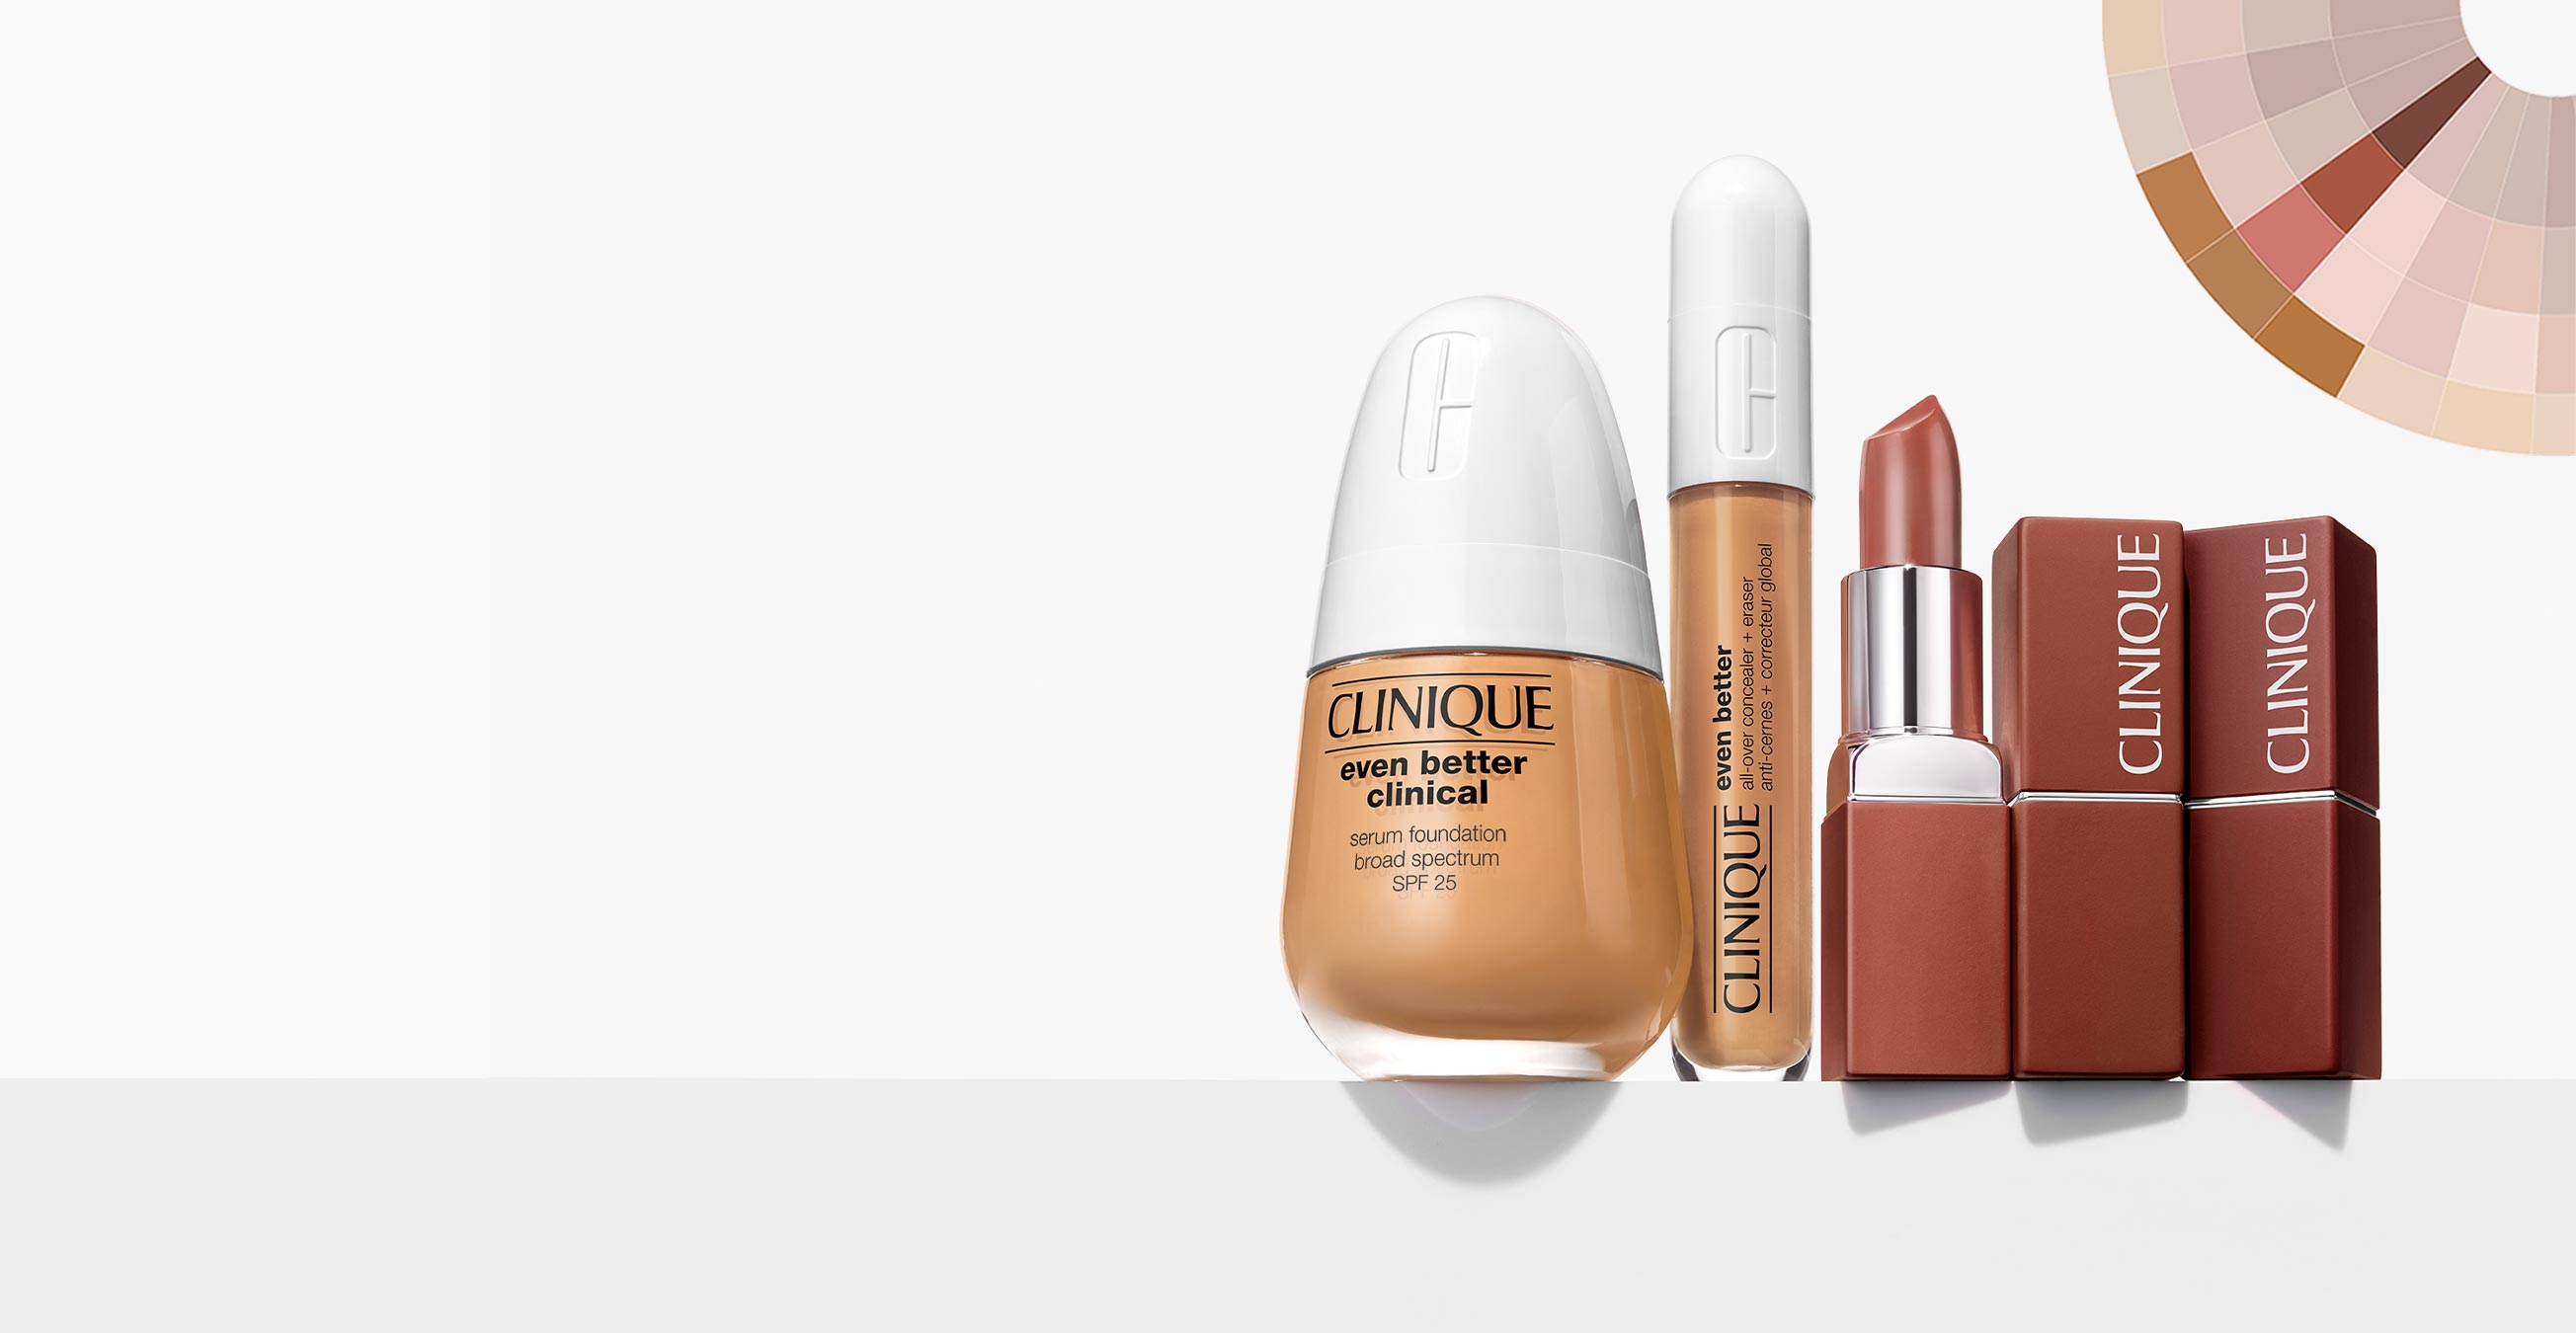 Clinique Shade-Match Science™